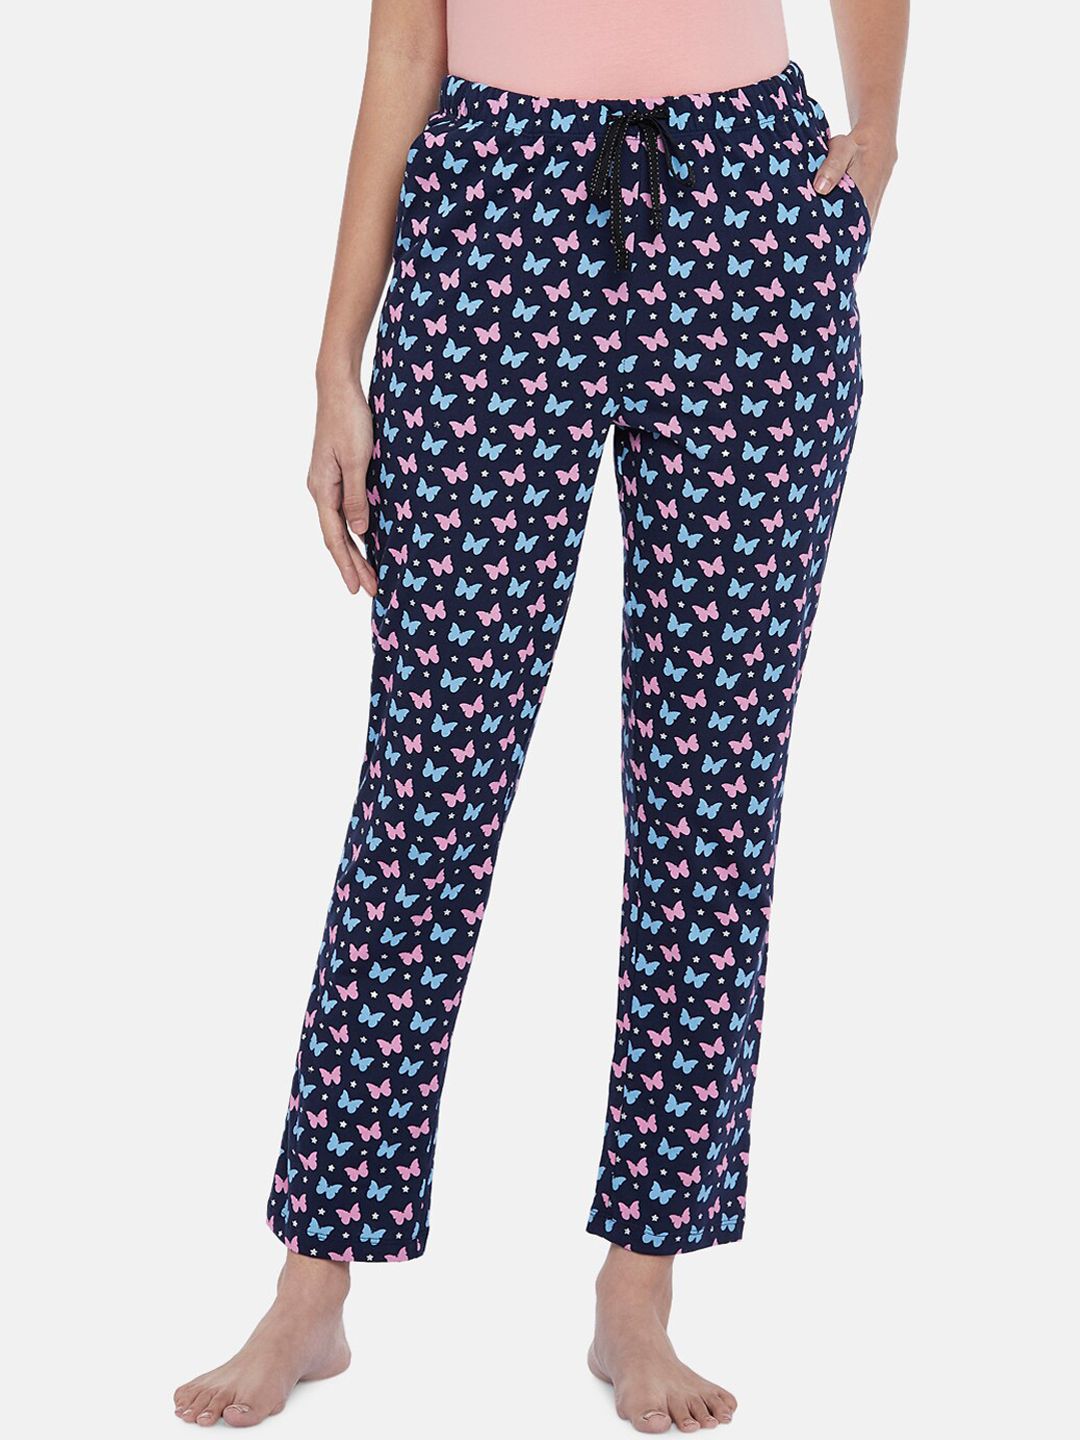 Dreamz by Pantaloons Women Navy Blue & Pink Printed Cotton Lounge Pants Price in India